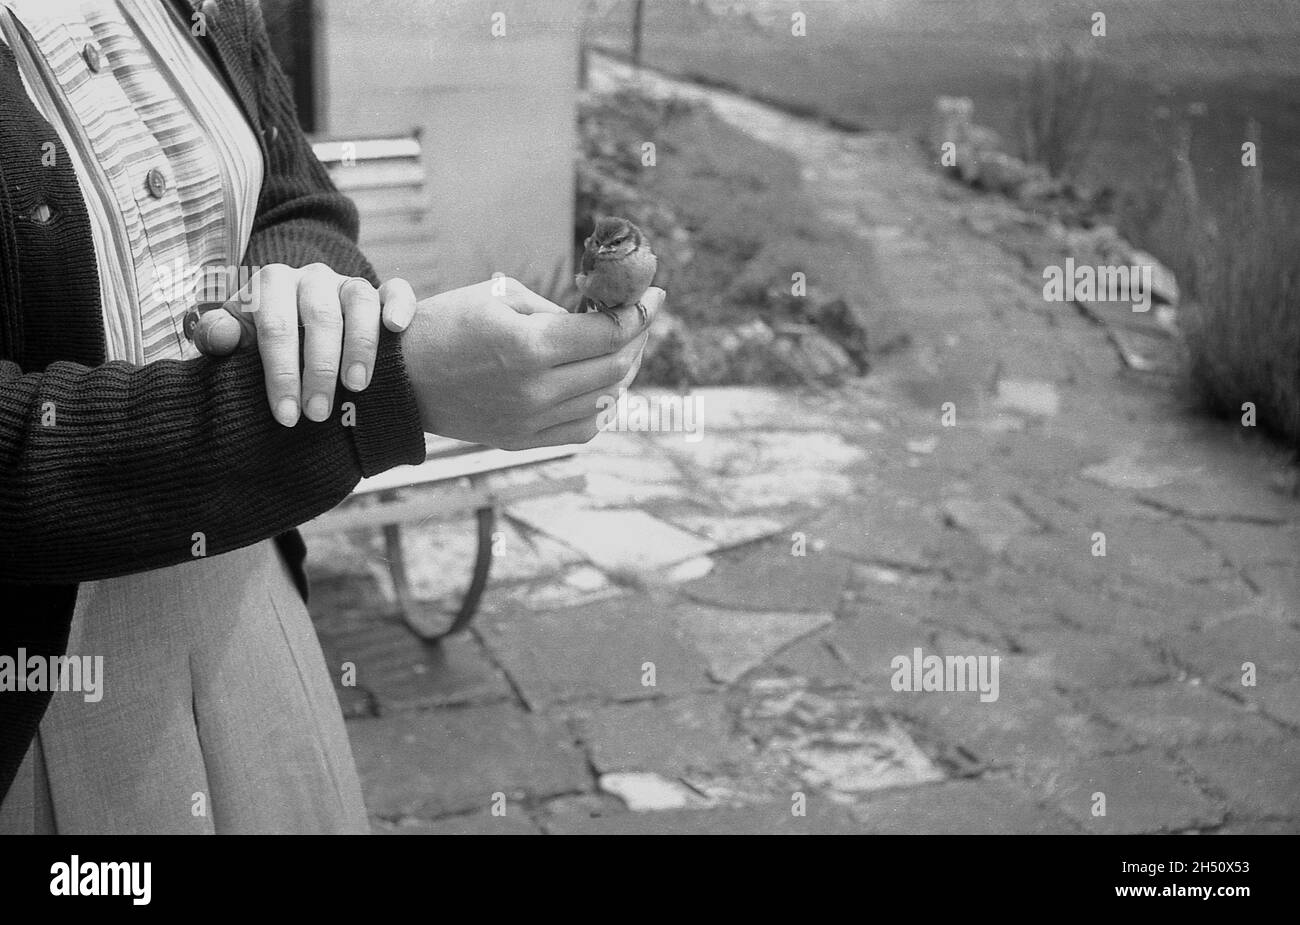 1950s, historical, outside a lady with a small bird, a baby bird, sitting on the fingers of her hand, perhaps hand-reared by the lady, England, UK. Although a time consuming undertaking, hand reared birds can make excellent pets, being easier to tame and calmer around people. Stock Photo